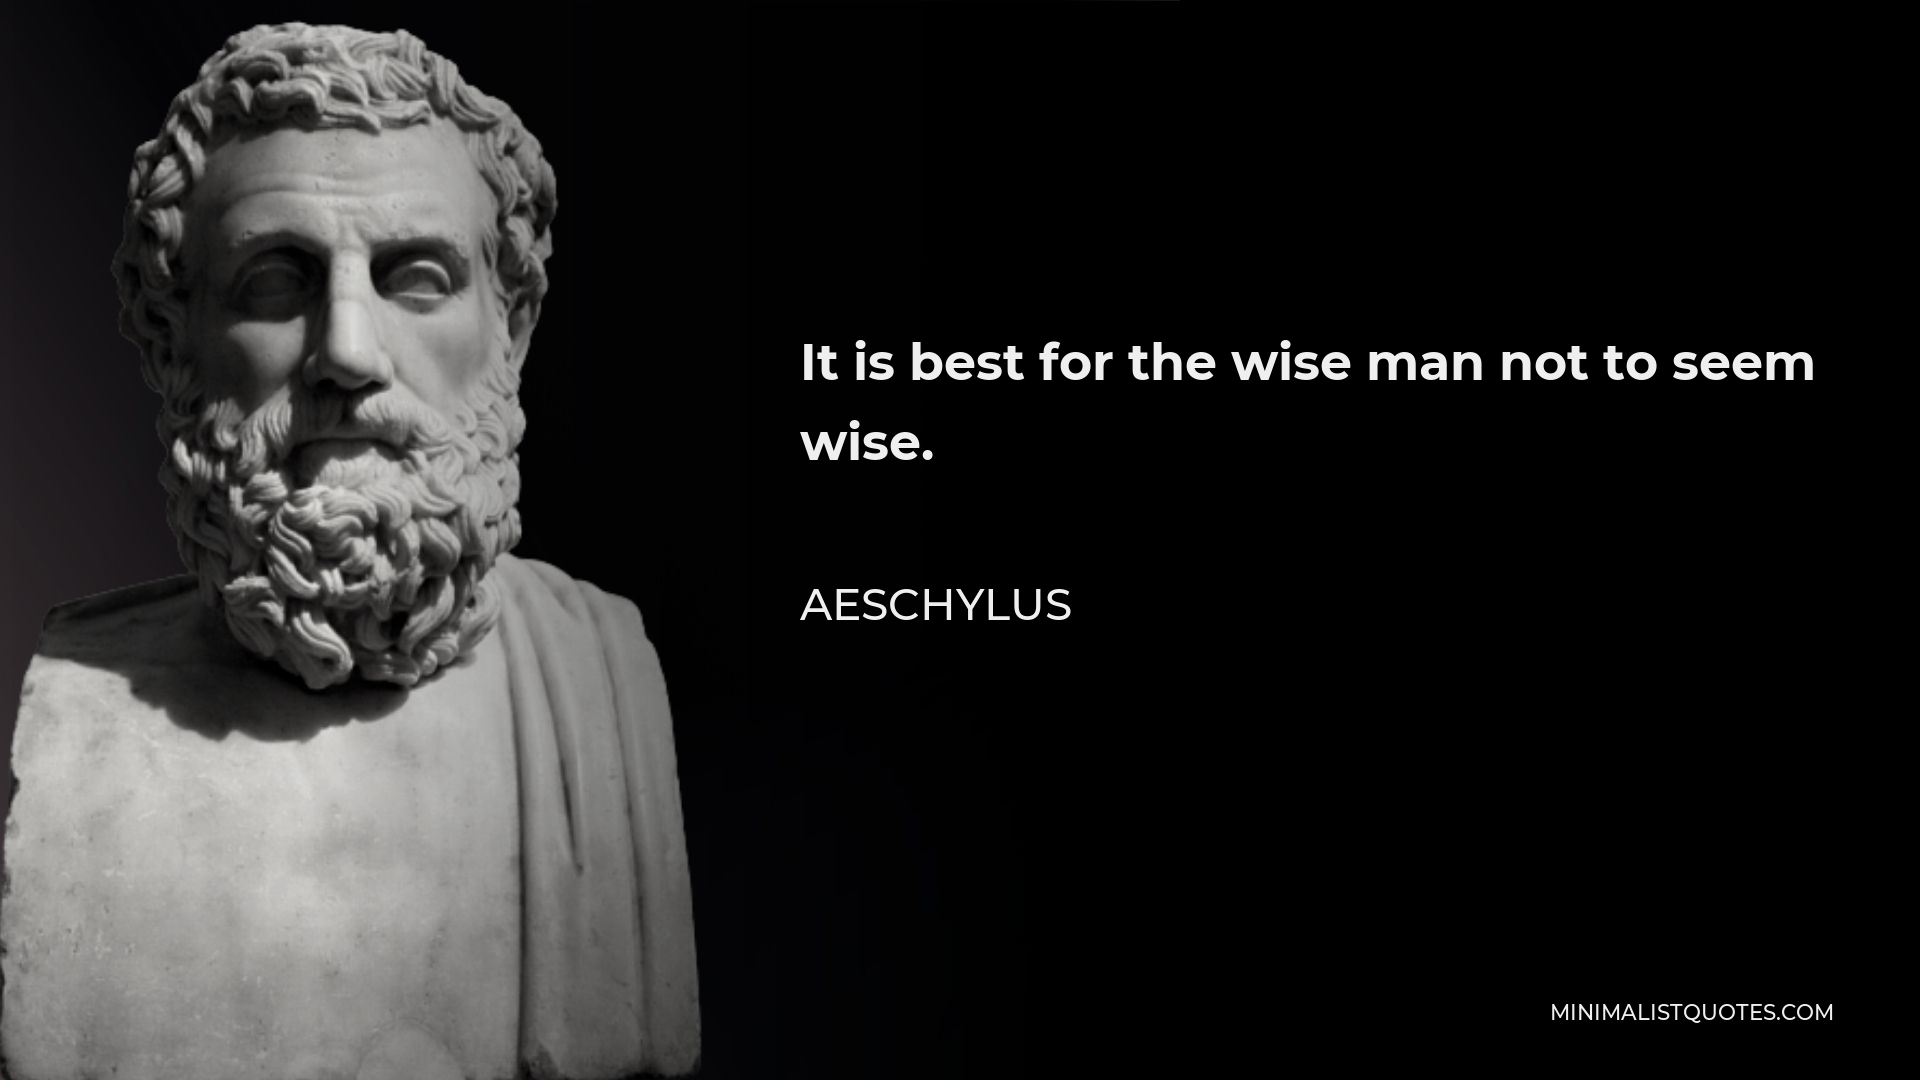 Aeschylus Quote - It is best for the wise man not to seem wise.